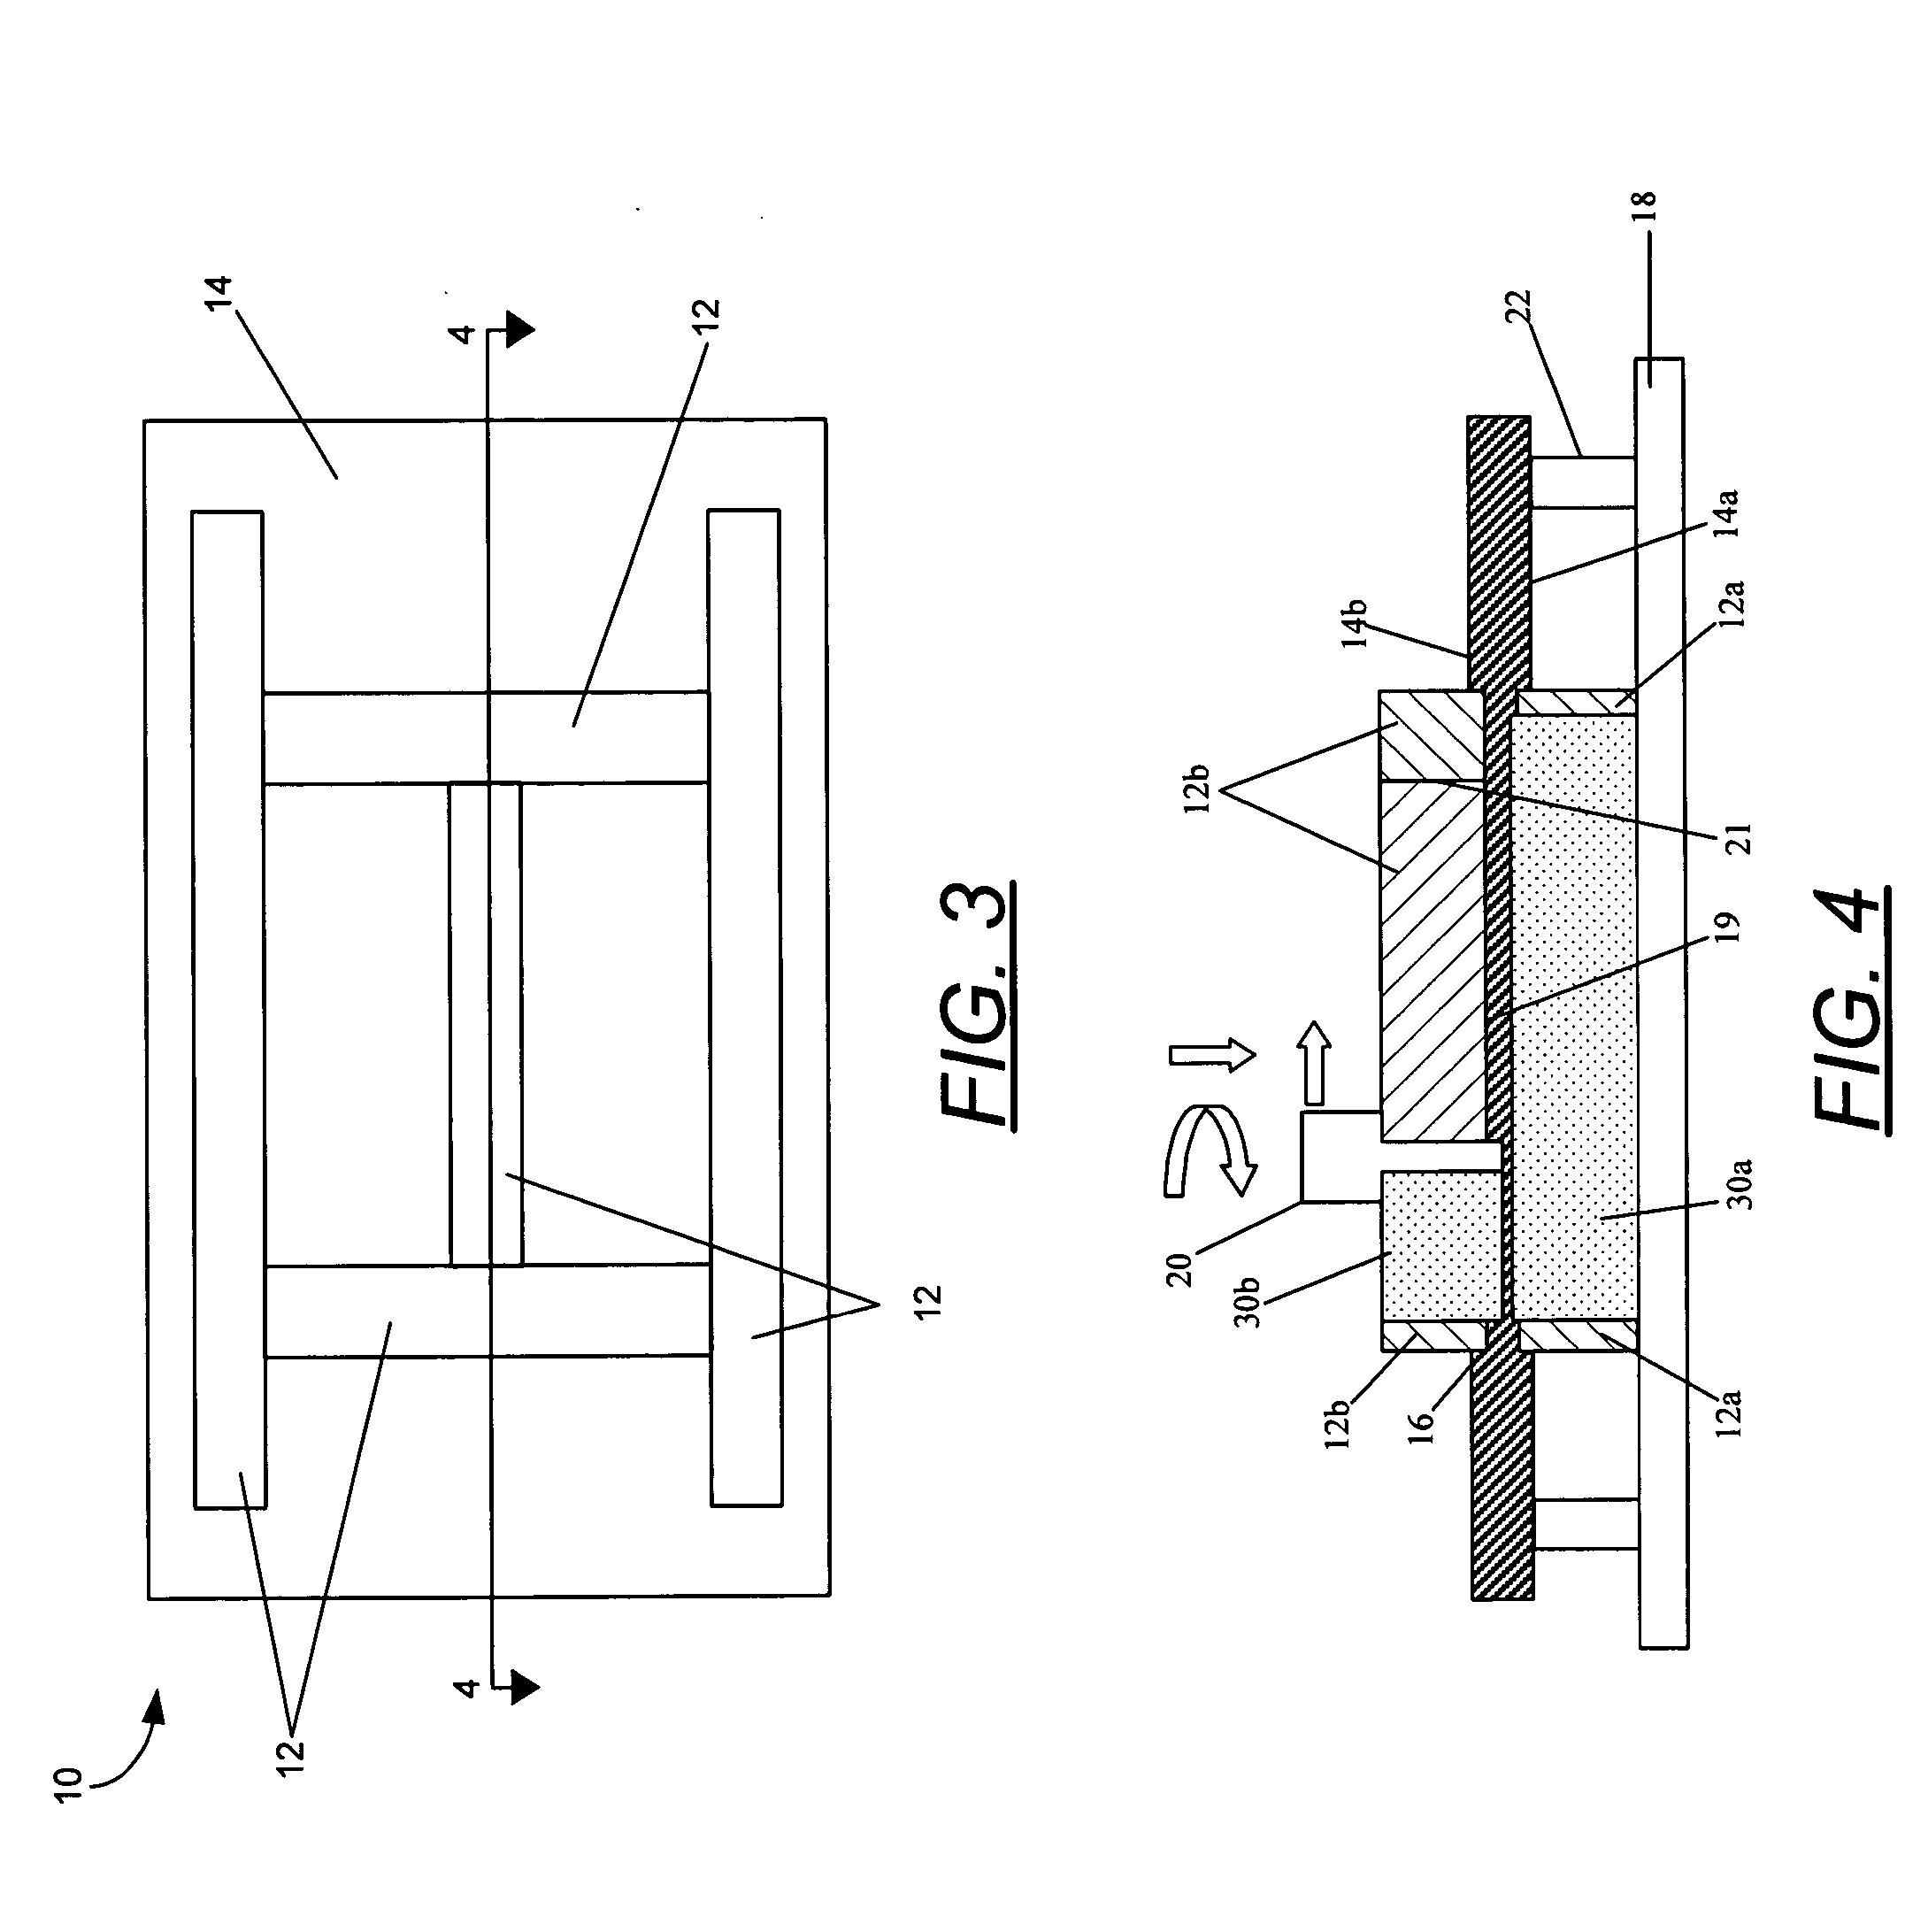 Apparatus and system for welding self-fixtured preforms and associated method